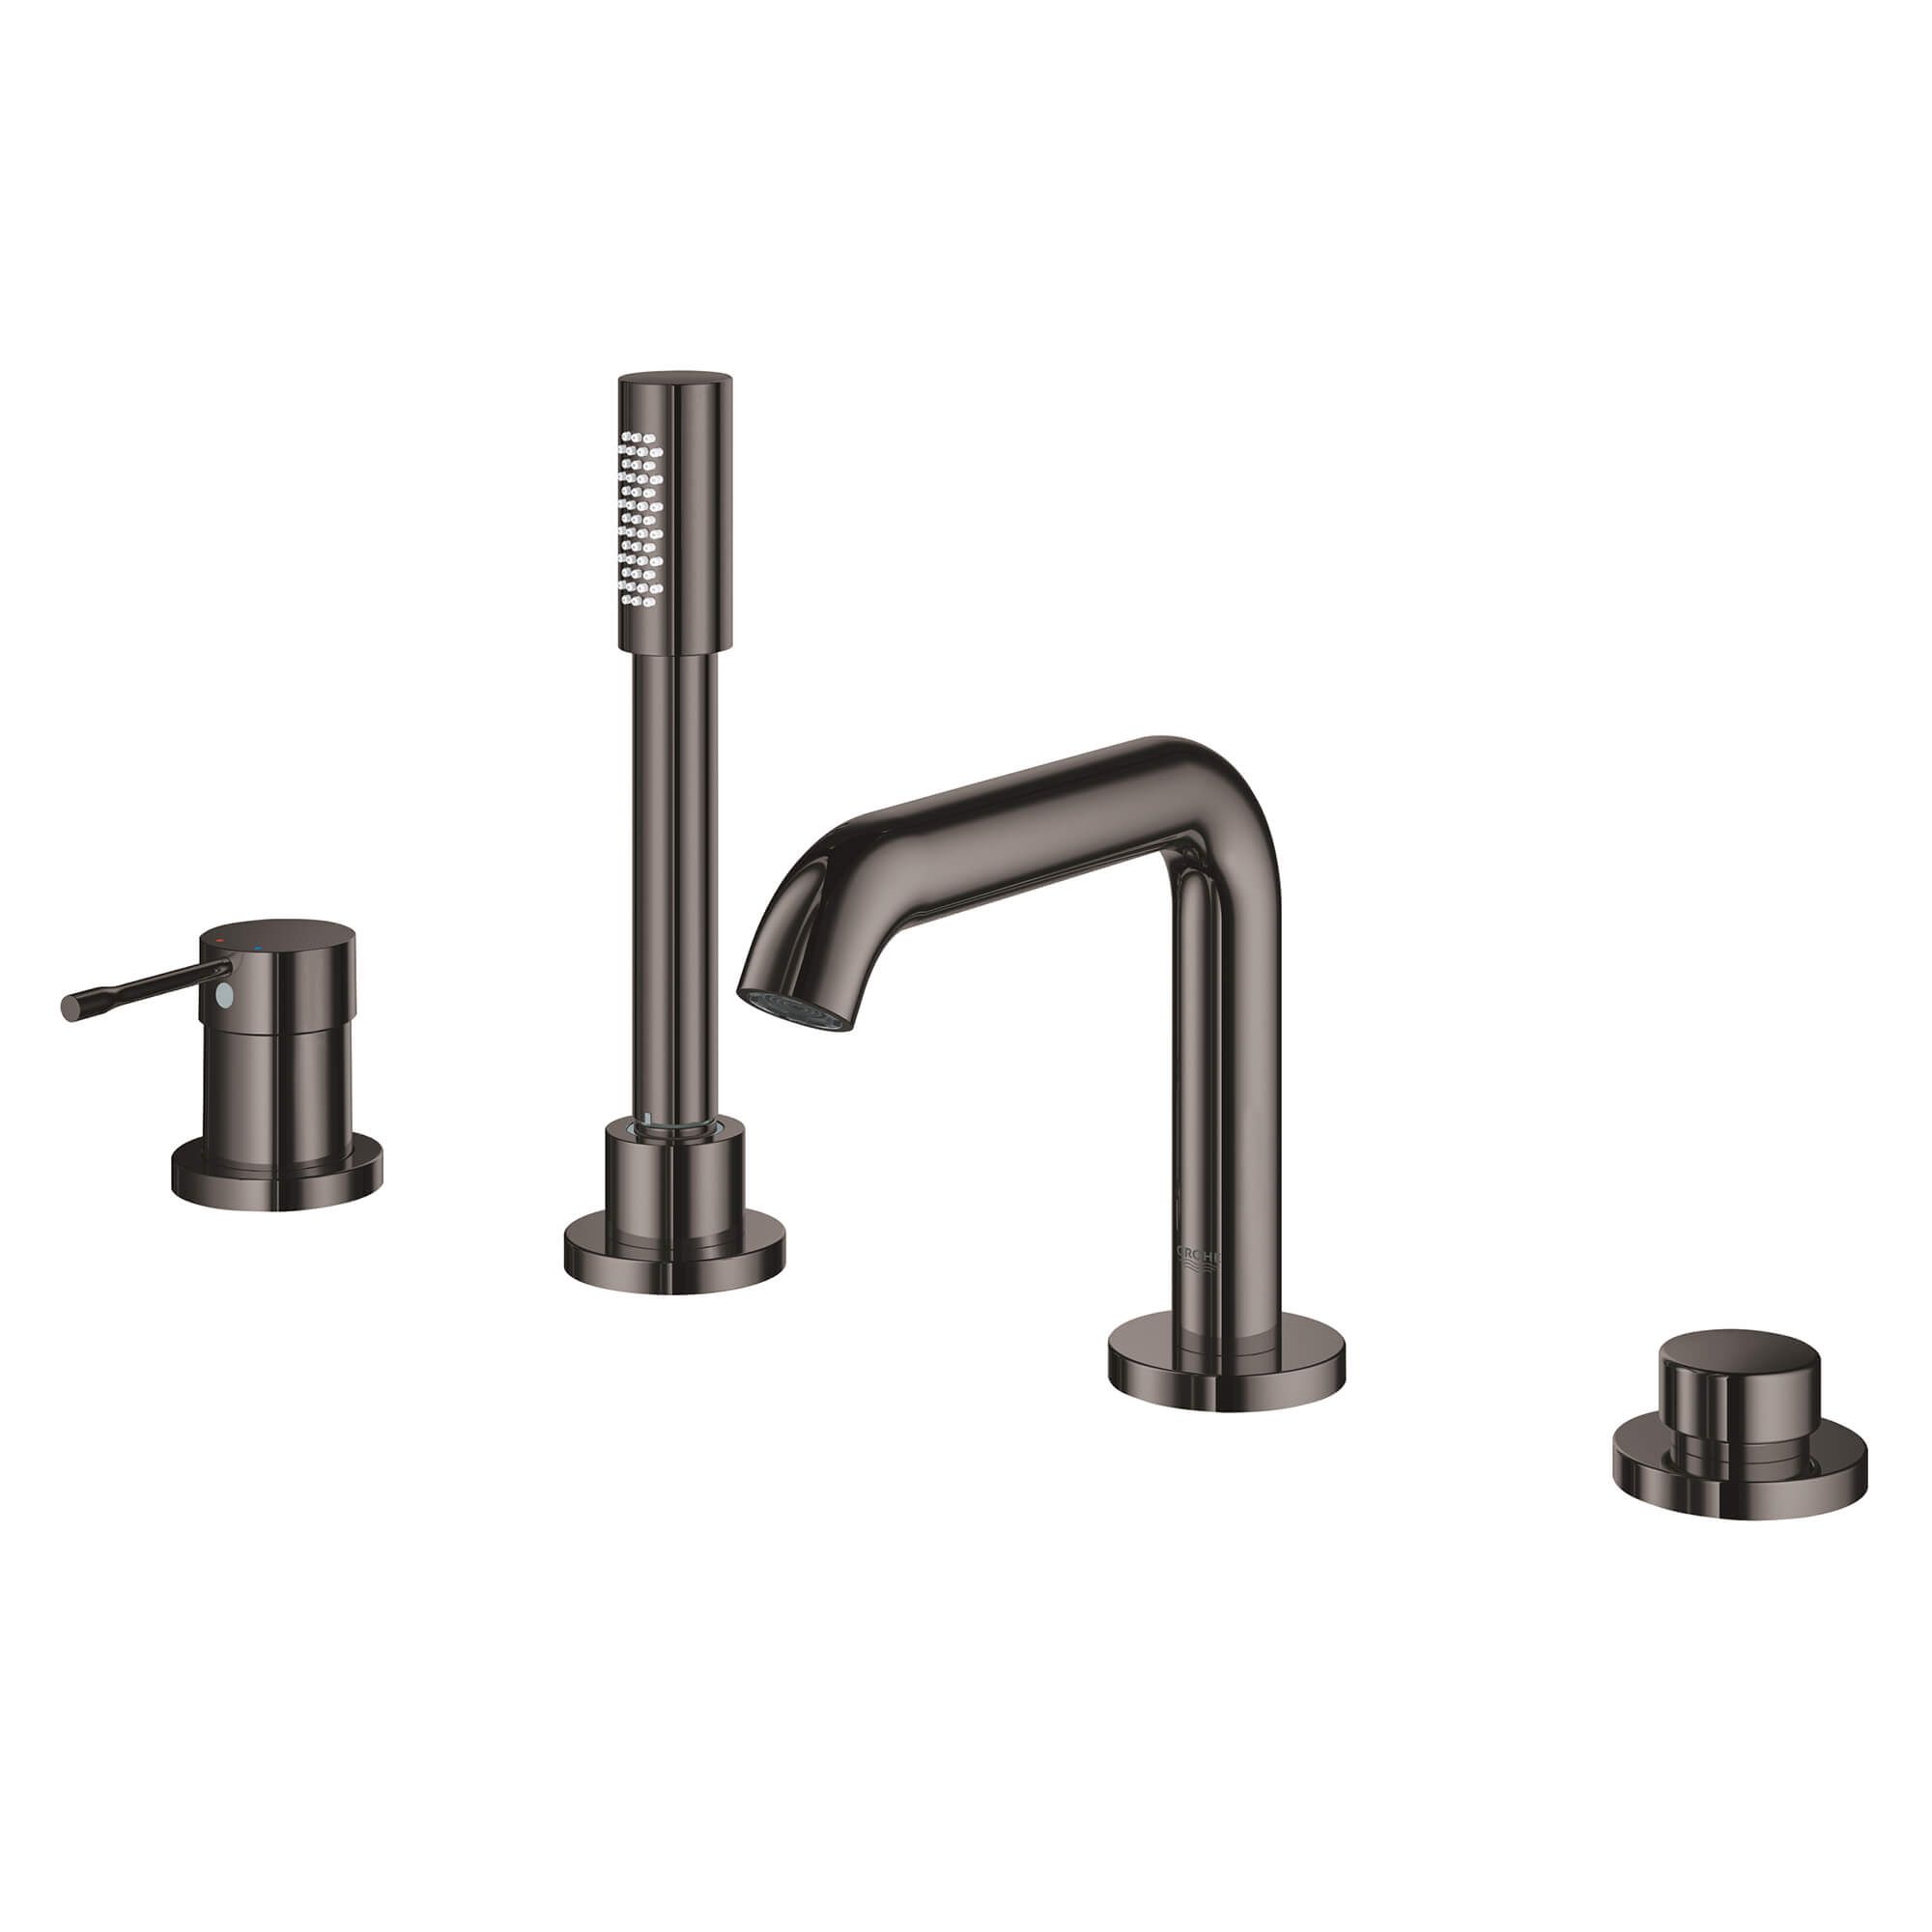 Commandant het is mooi Vijf GROHE Essence New Hard Graphite 1-handle Deck-mount Roman Low-arc Bathtub  Faucet with Hand Shower in the Bathtub Faucets department at Lowes.com